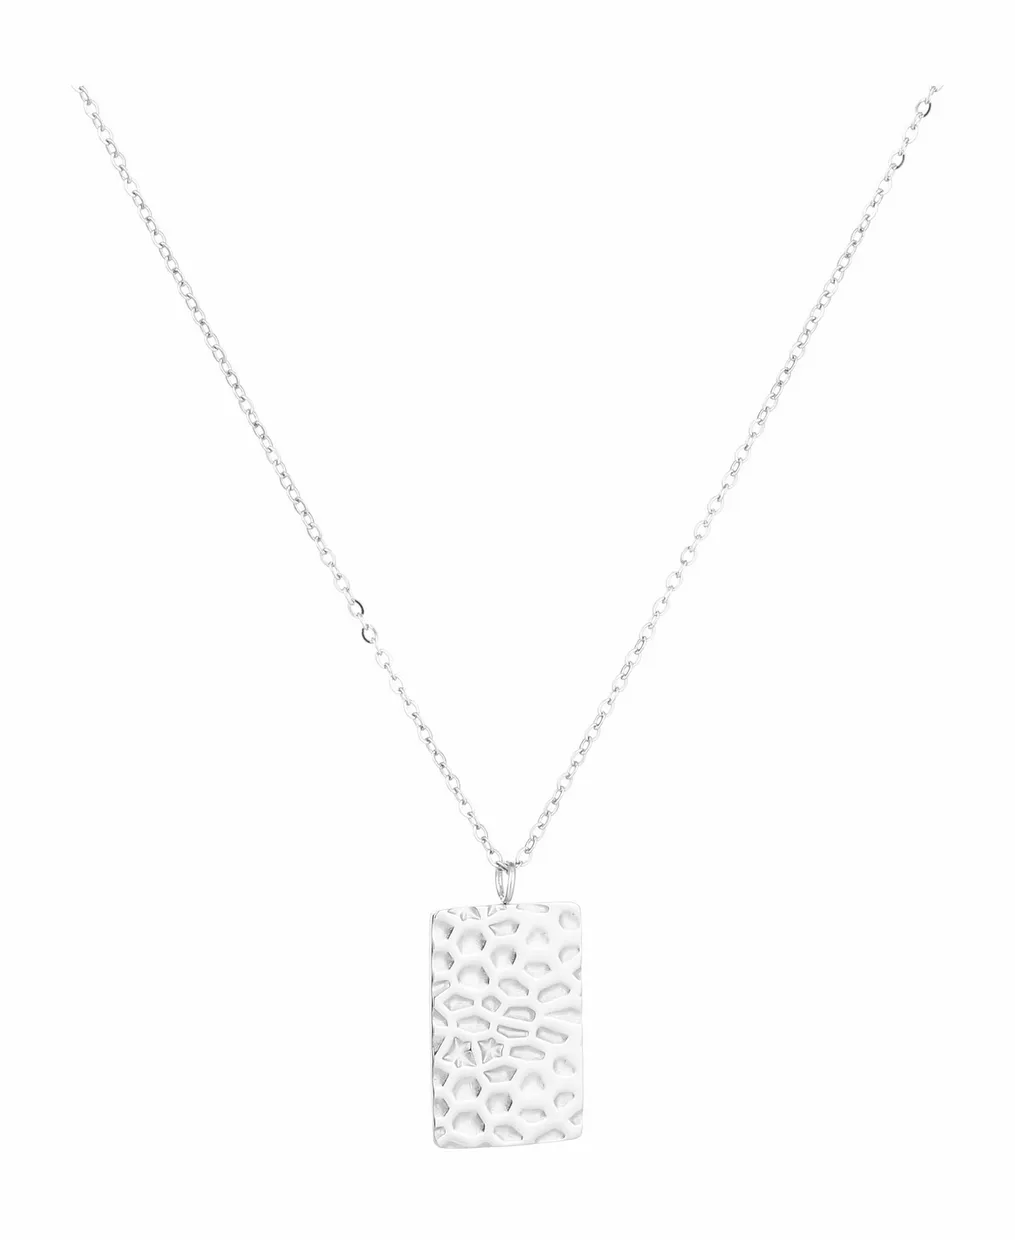 Leo plate necklace silver